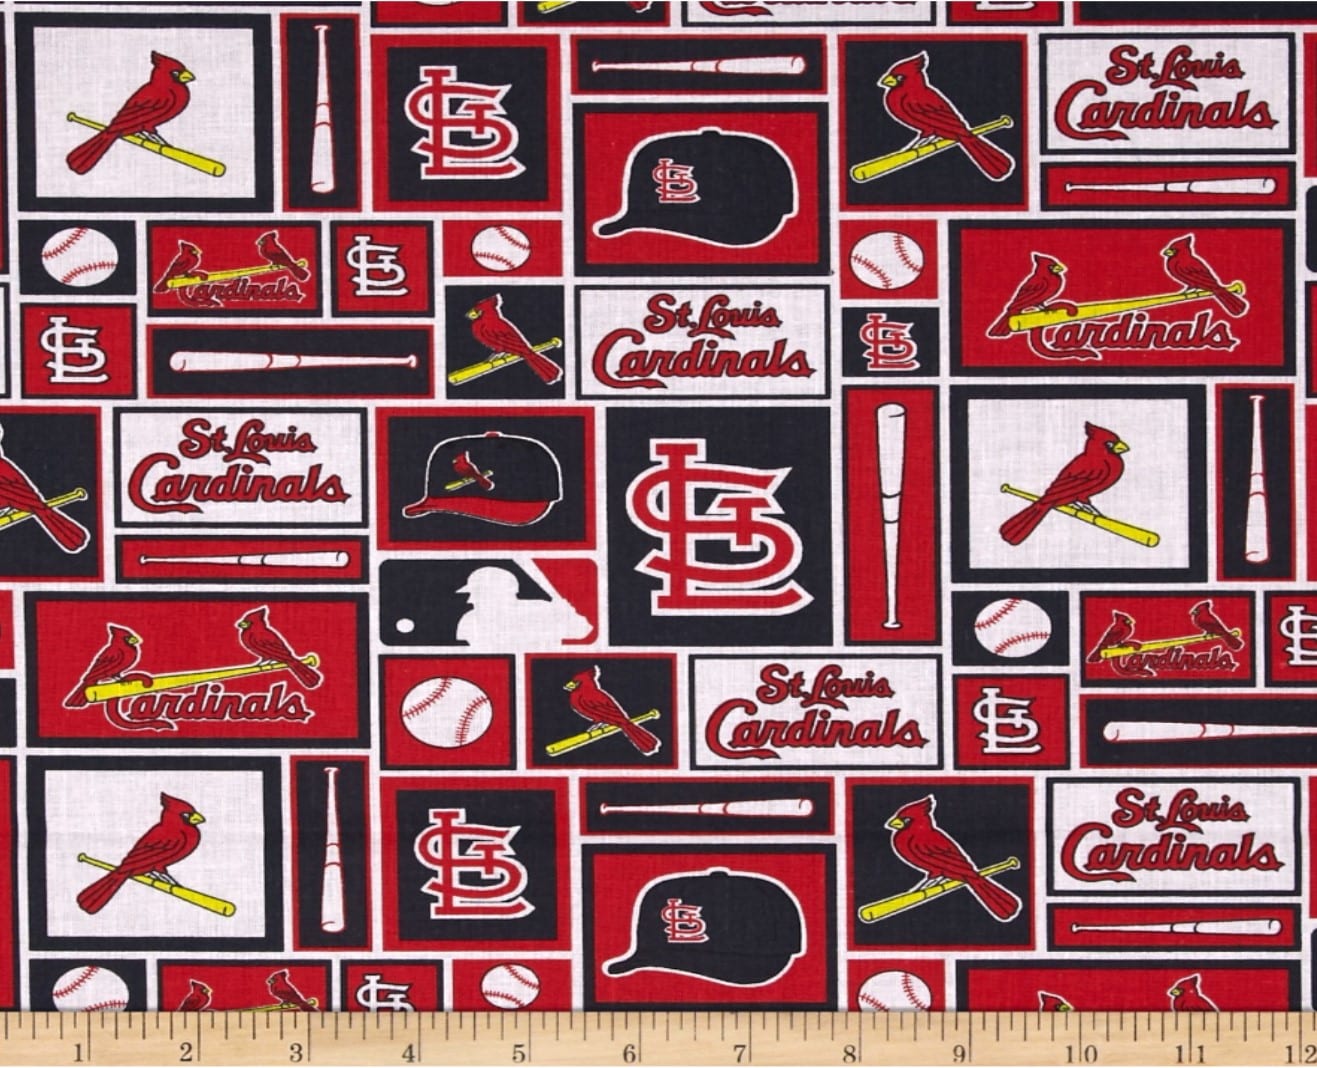 St. Louis Cardinals MLB Licensed Cotton Fabric, 60 in wide